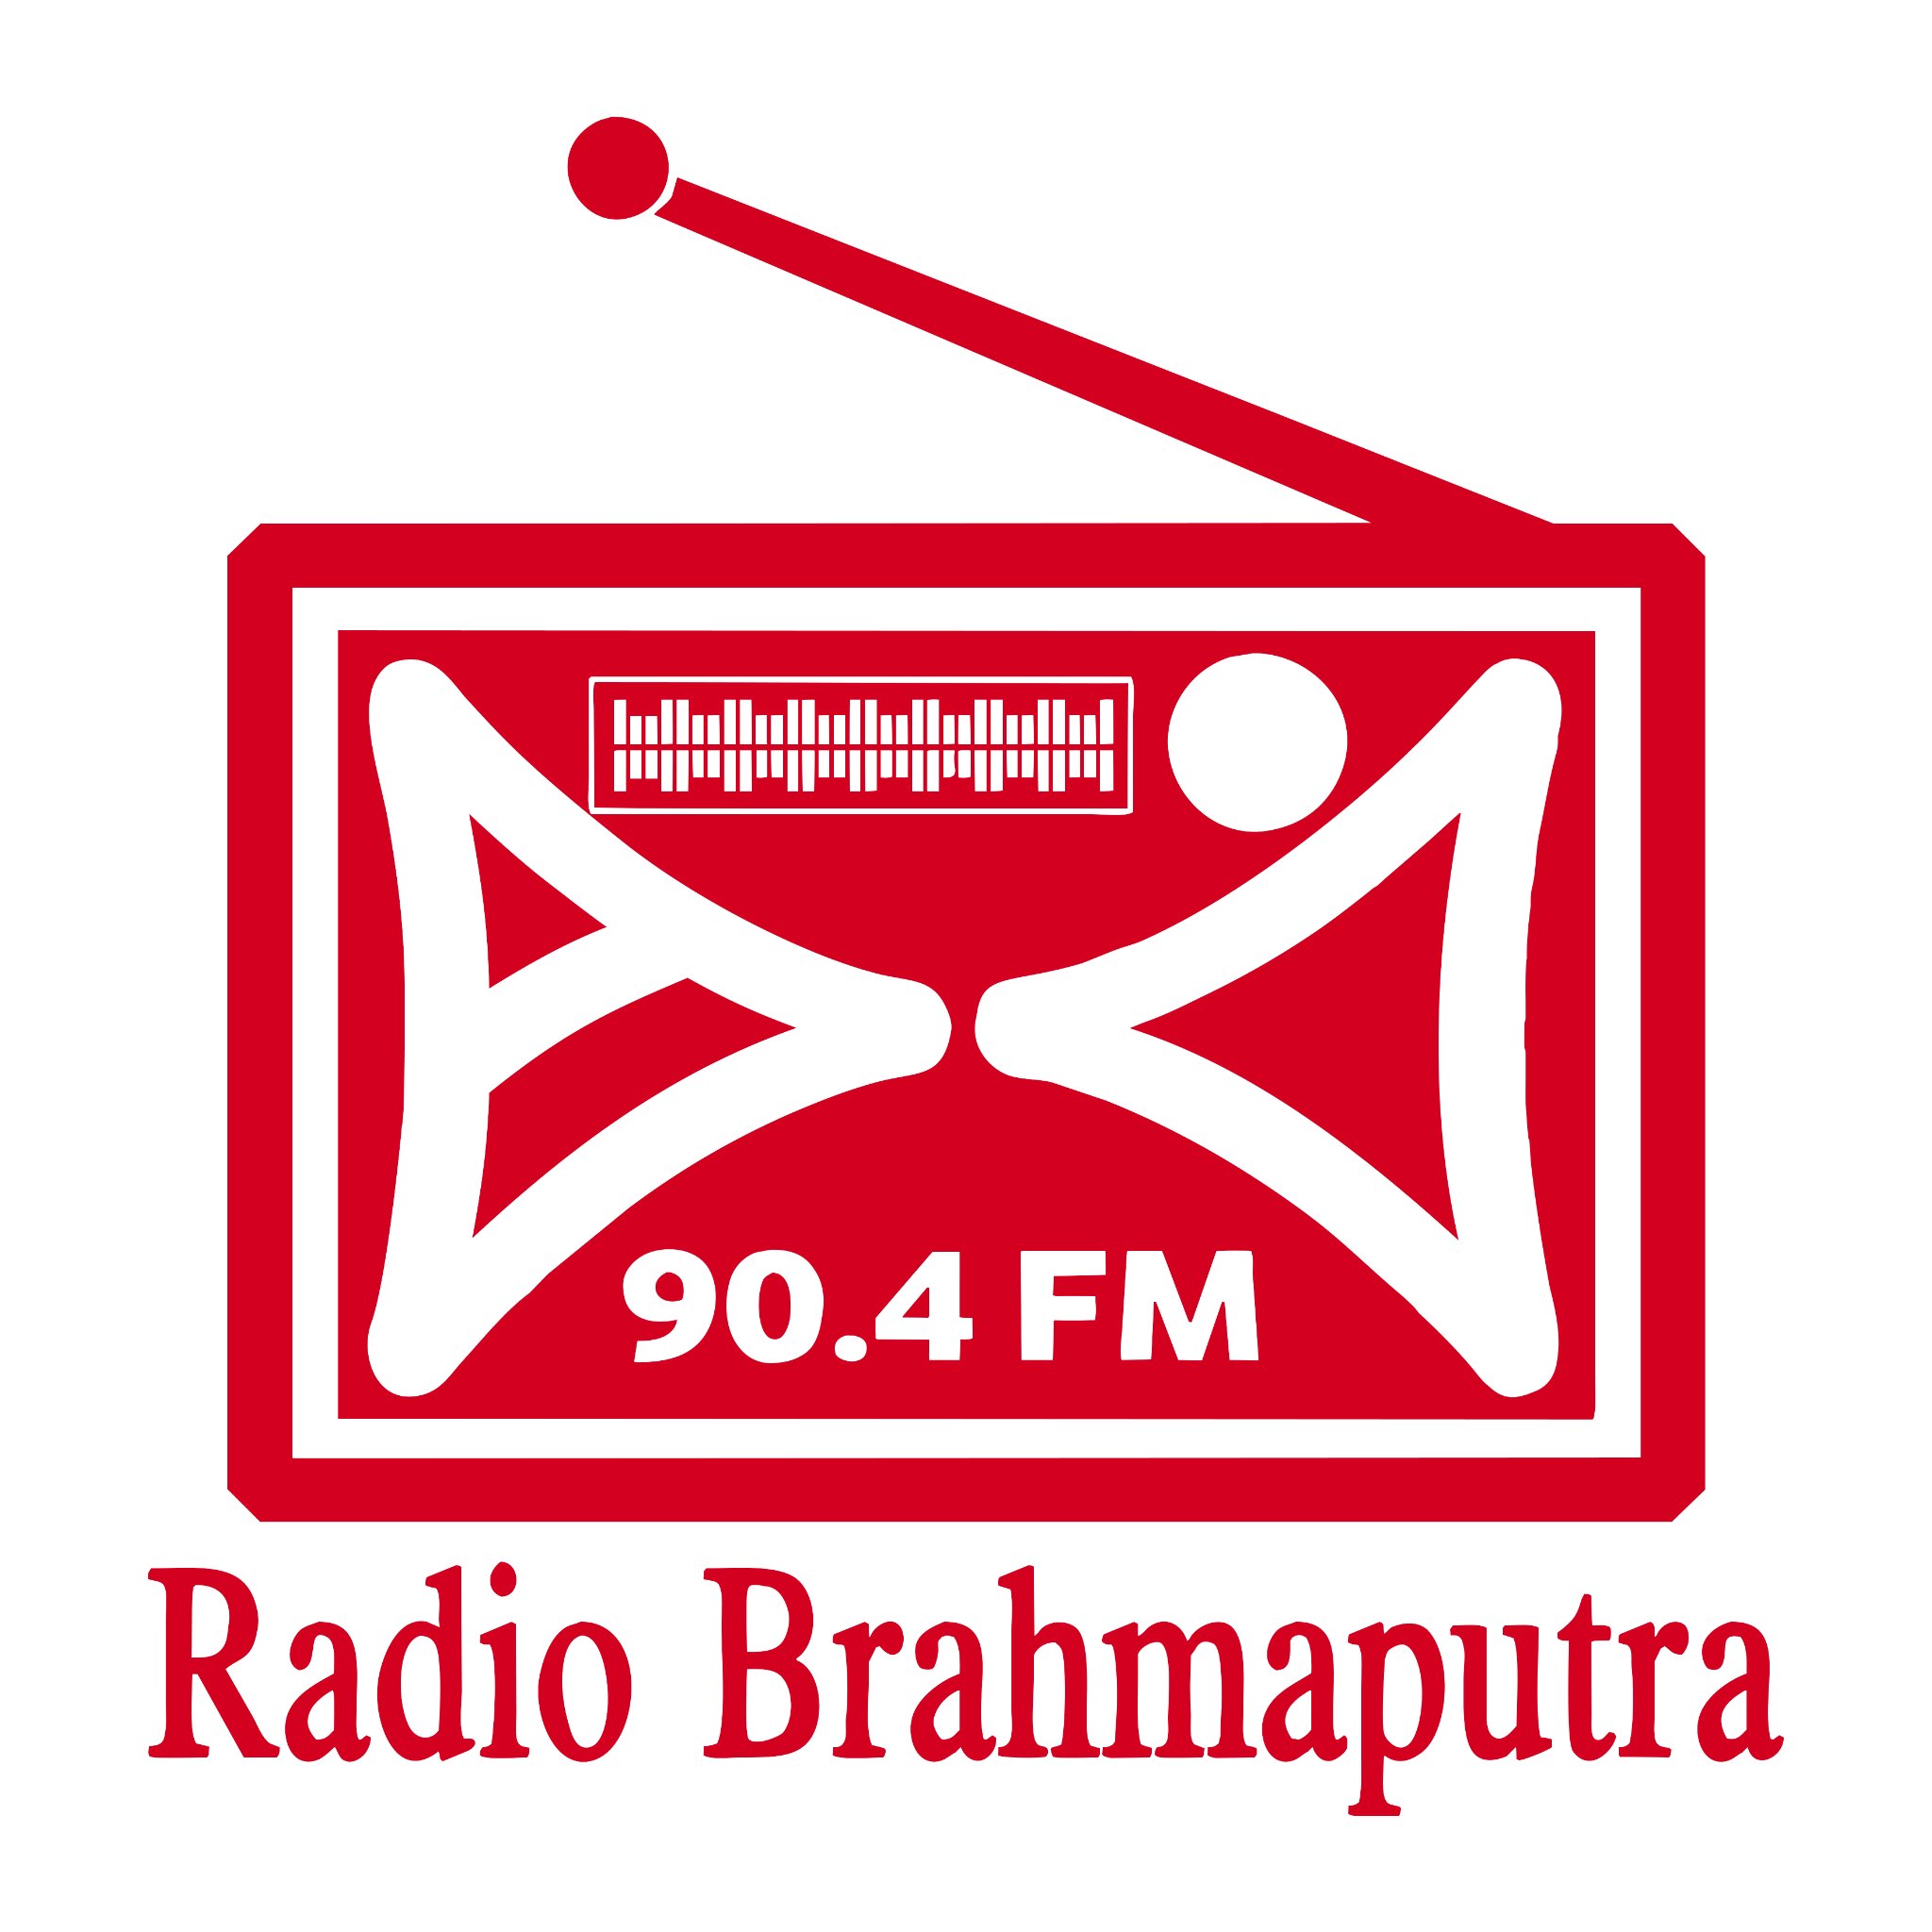 North-East India's First Grassroots Community Radio Station run by community workers & volunteers!